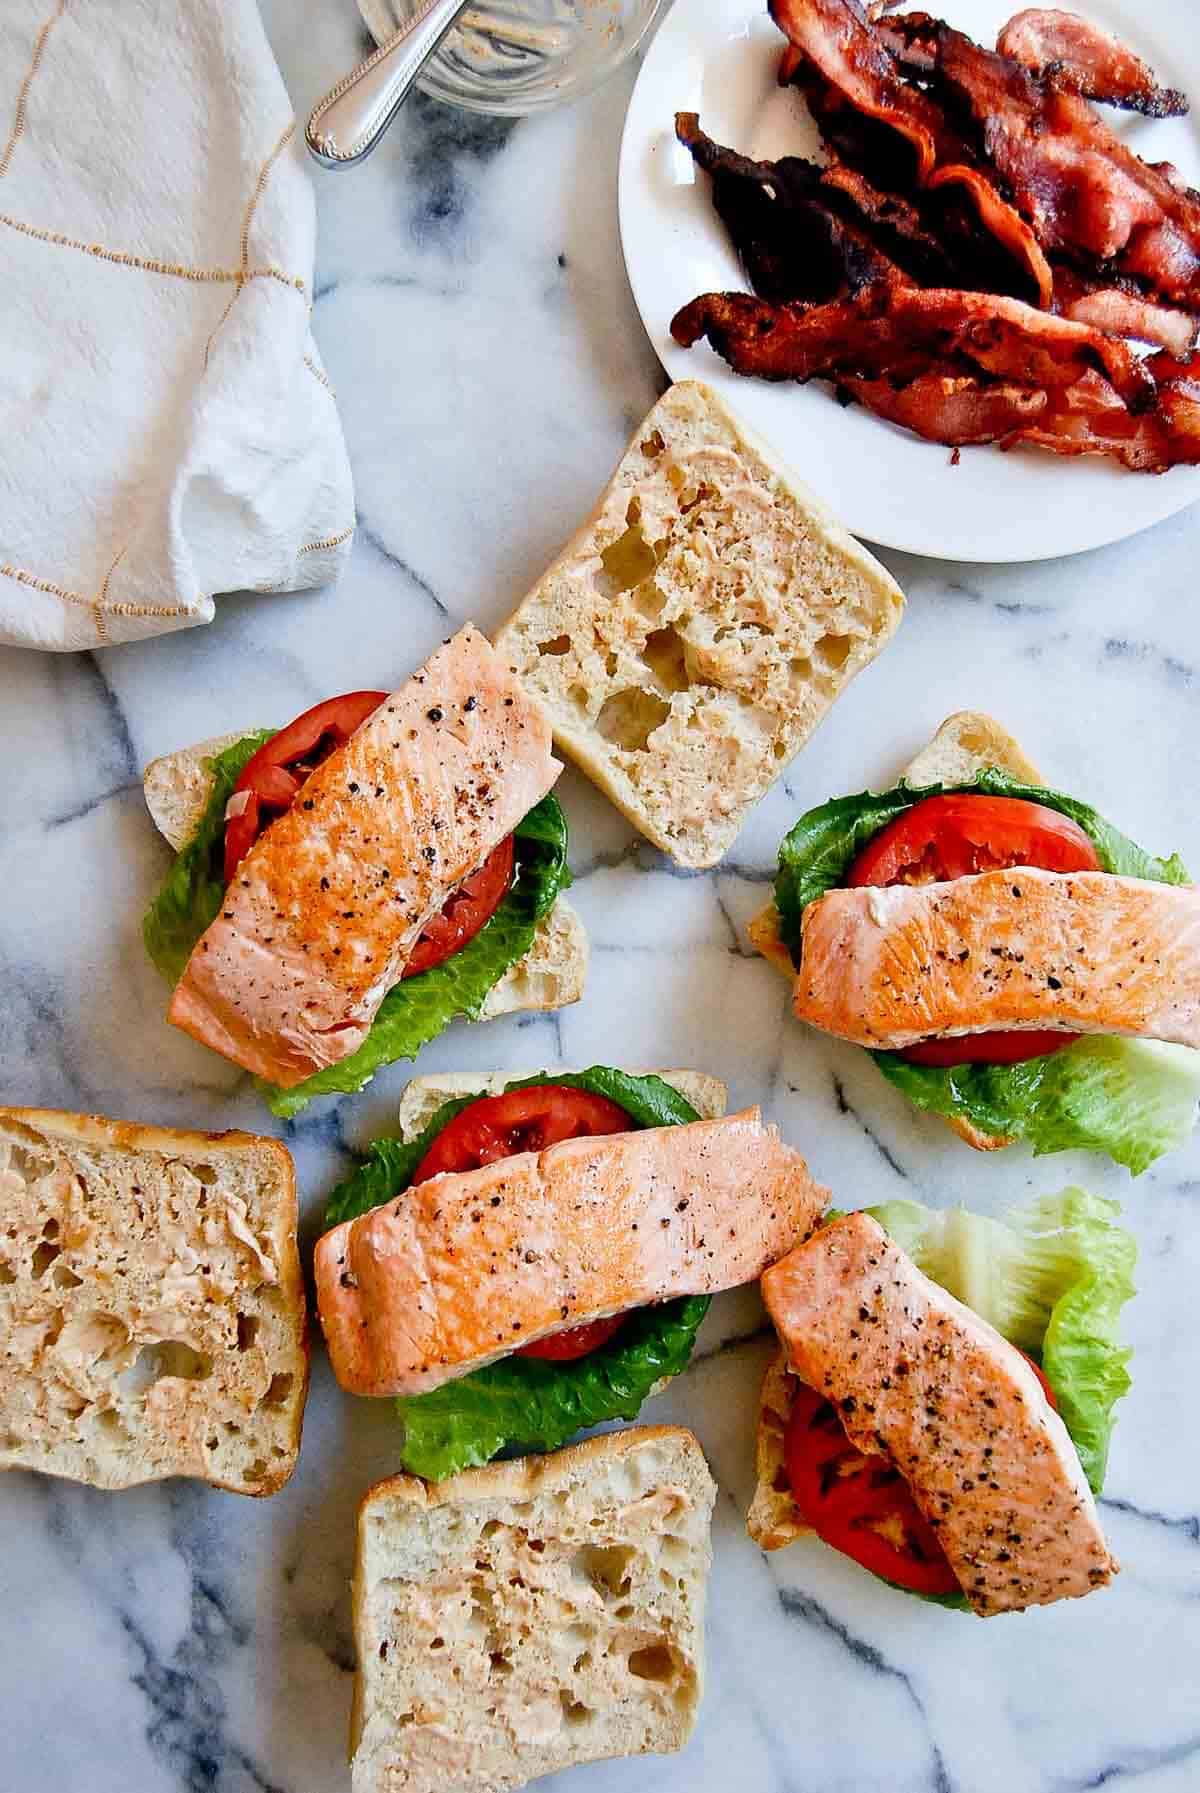 salmon pieces on buns with tomato and lettuce, and bacon on a plate to the side.